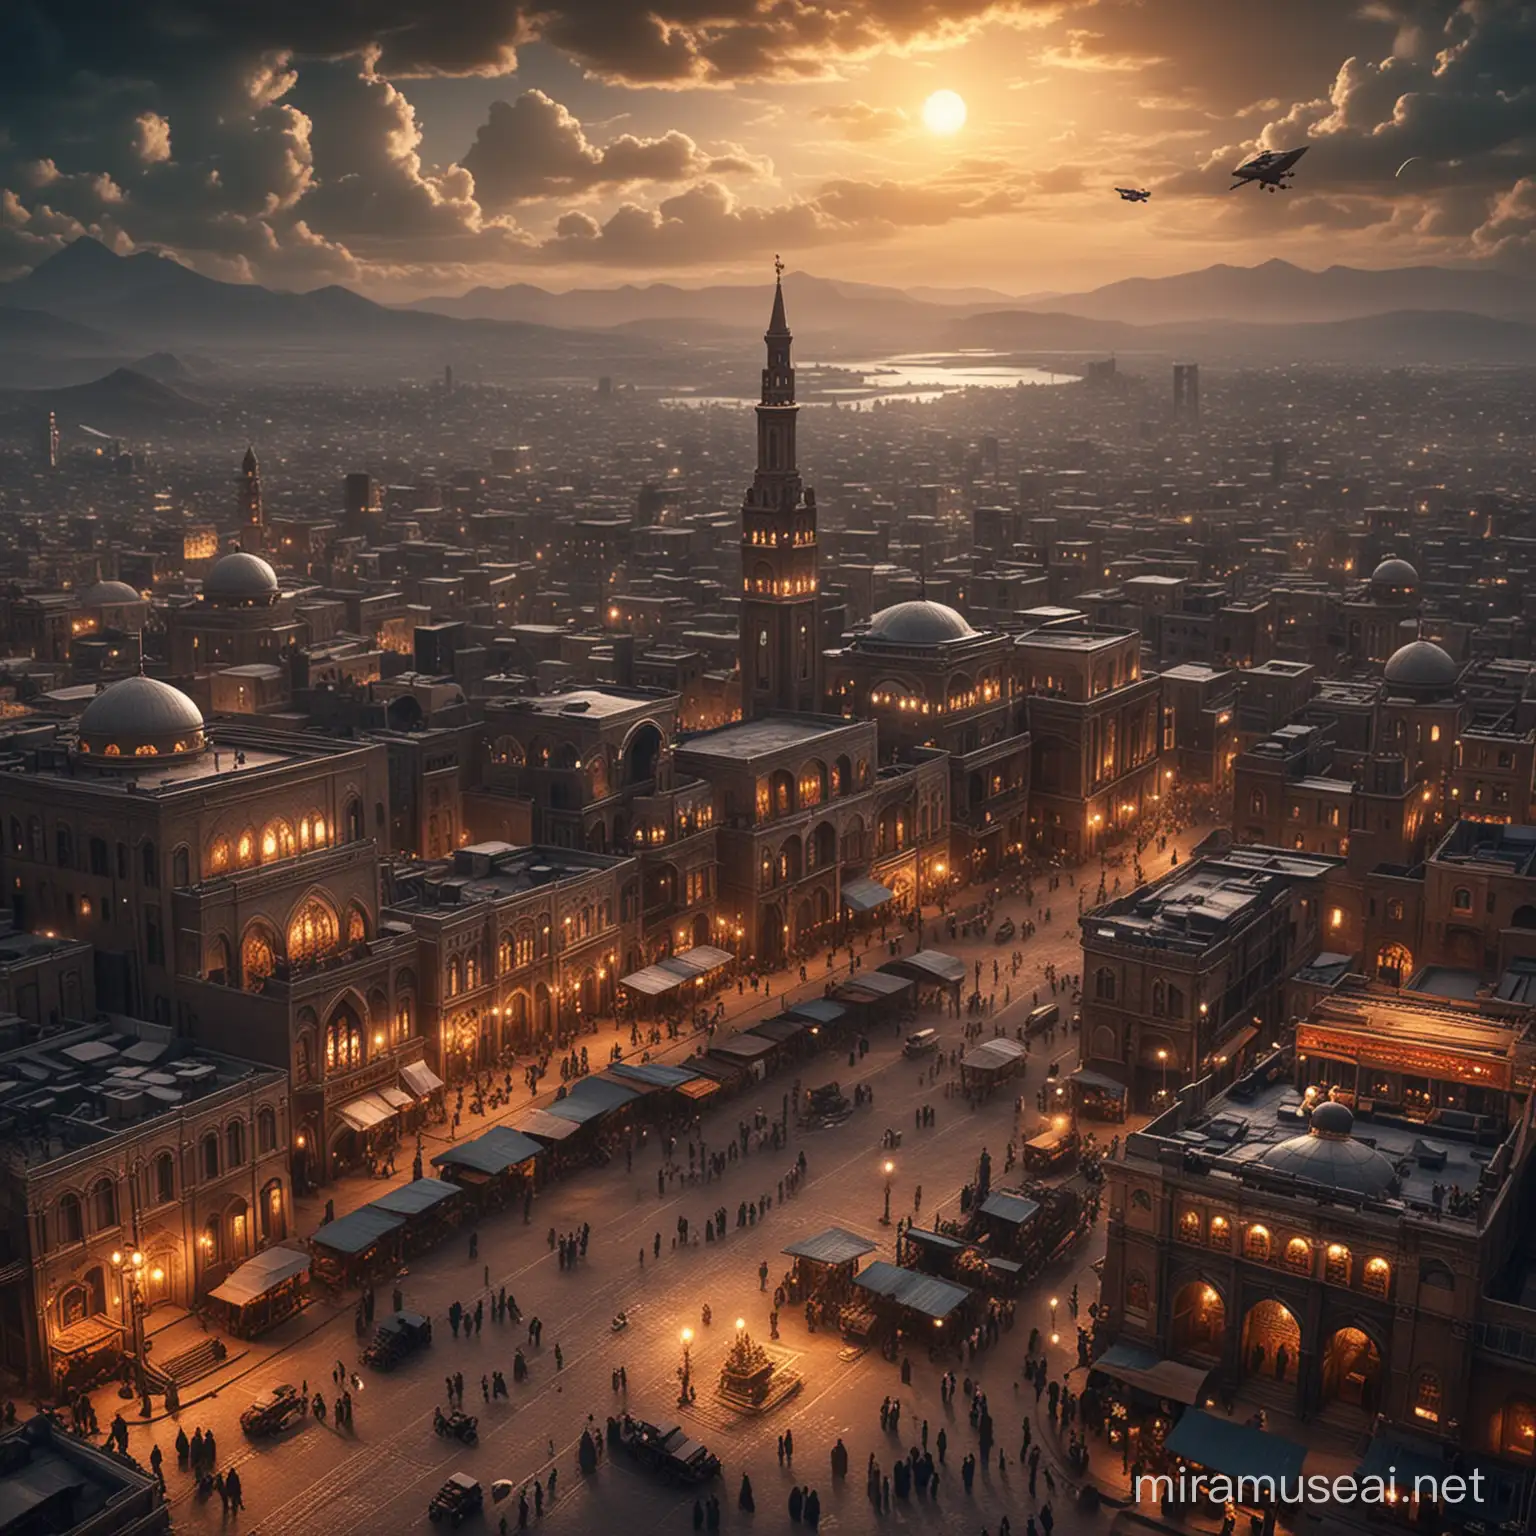 Please Create a city, which will be Steampunk, Dark Academia 1880s inspired Tehran, I want this city to be historically accurate and have very Irani vibe with flying carpets and gennies